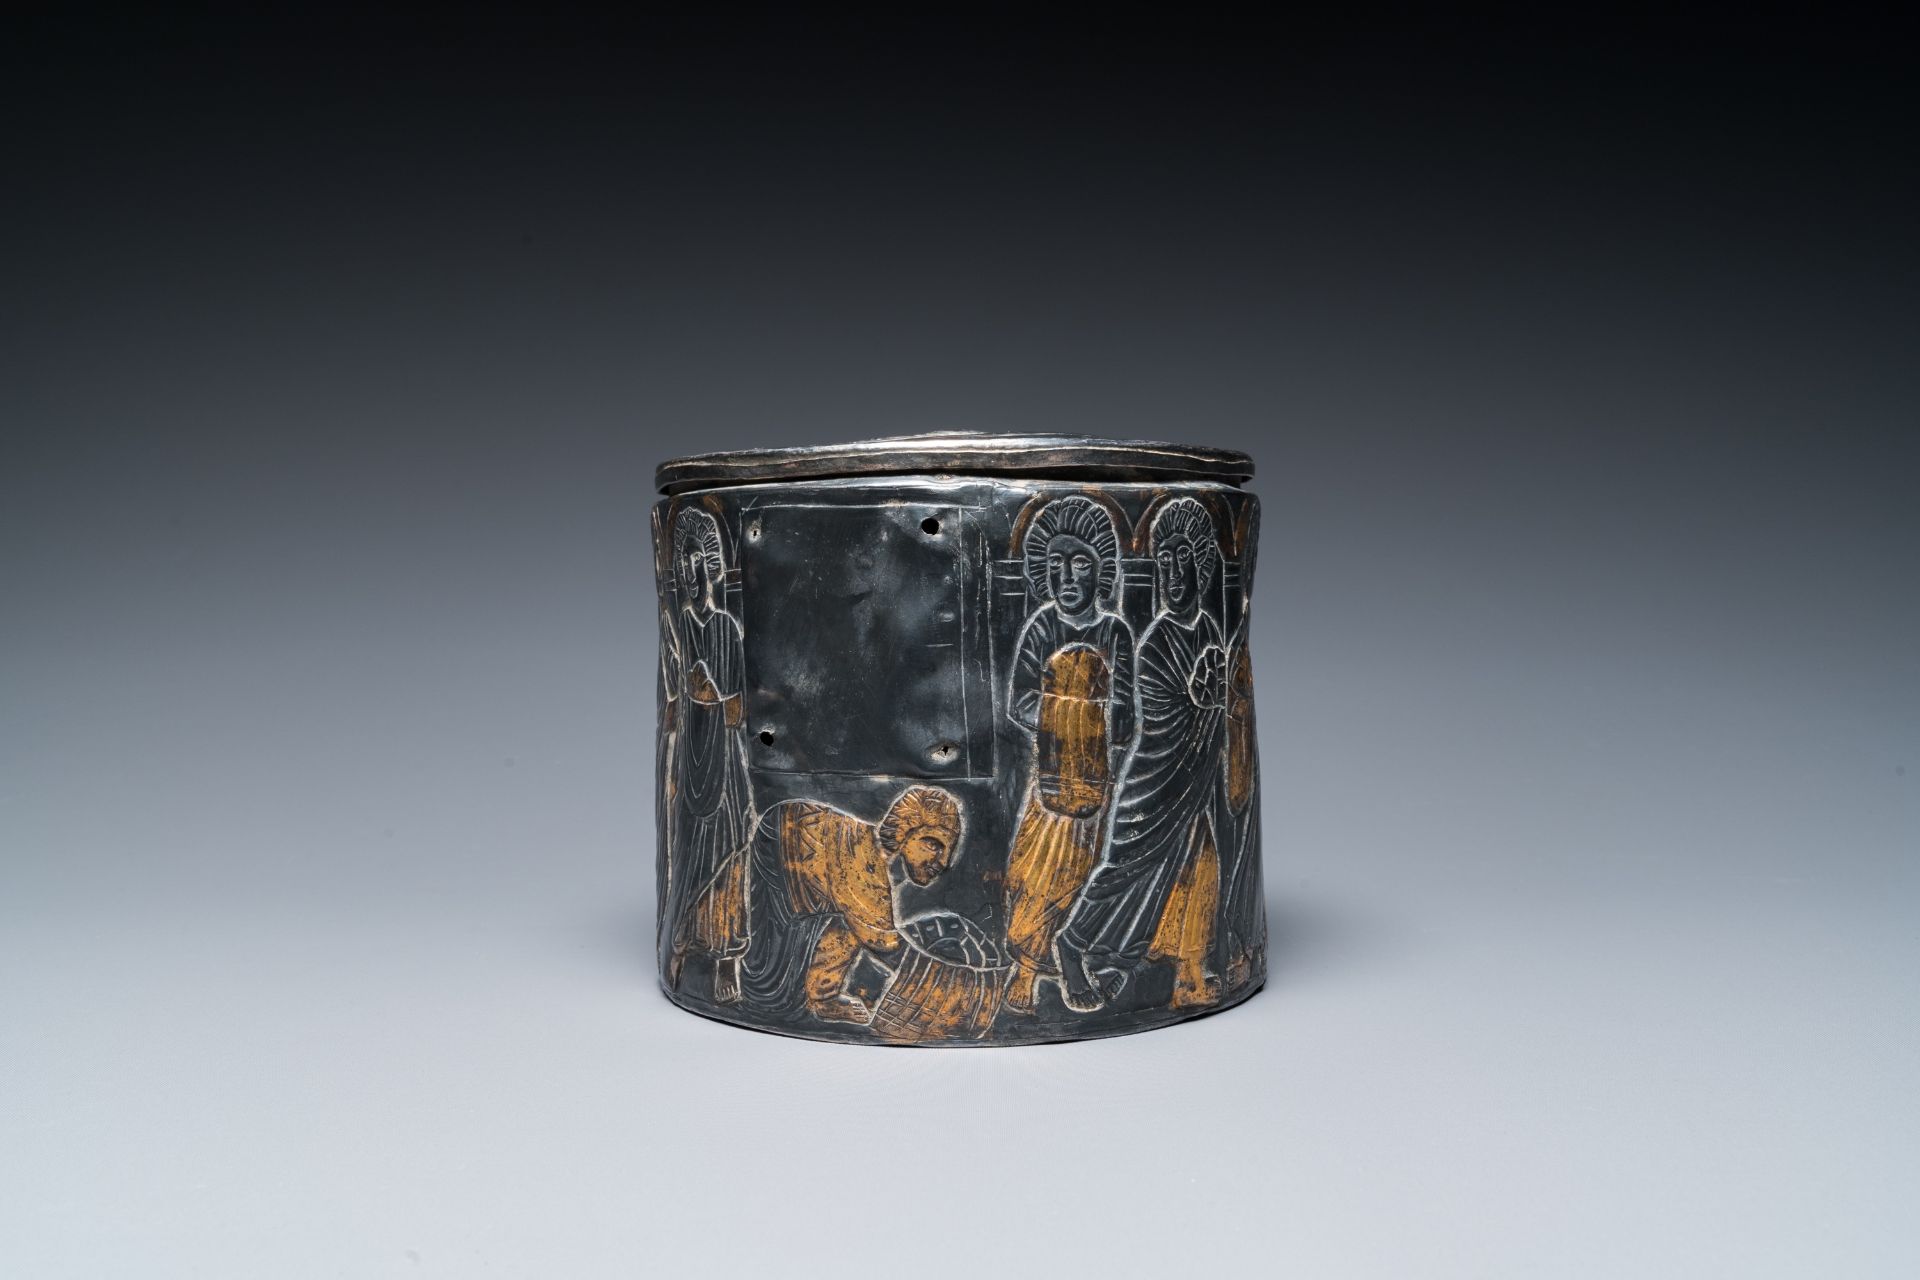 A probably Byzantine parcel-gilt silver pyxis, possibly Italy, 14th C. or later - Image 4 of 7